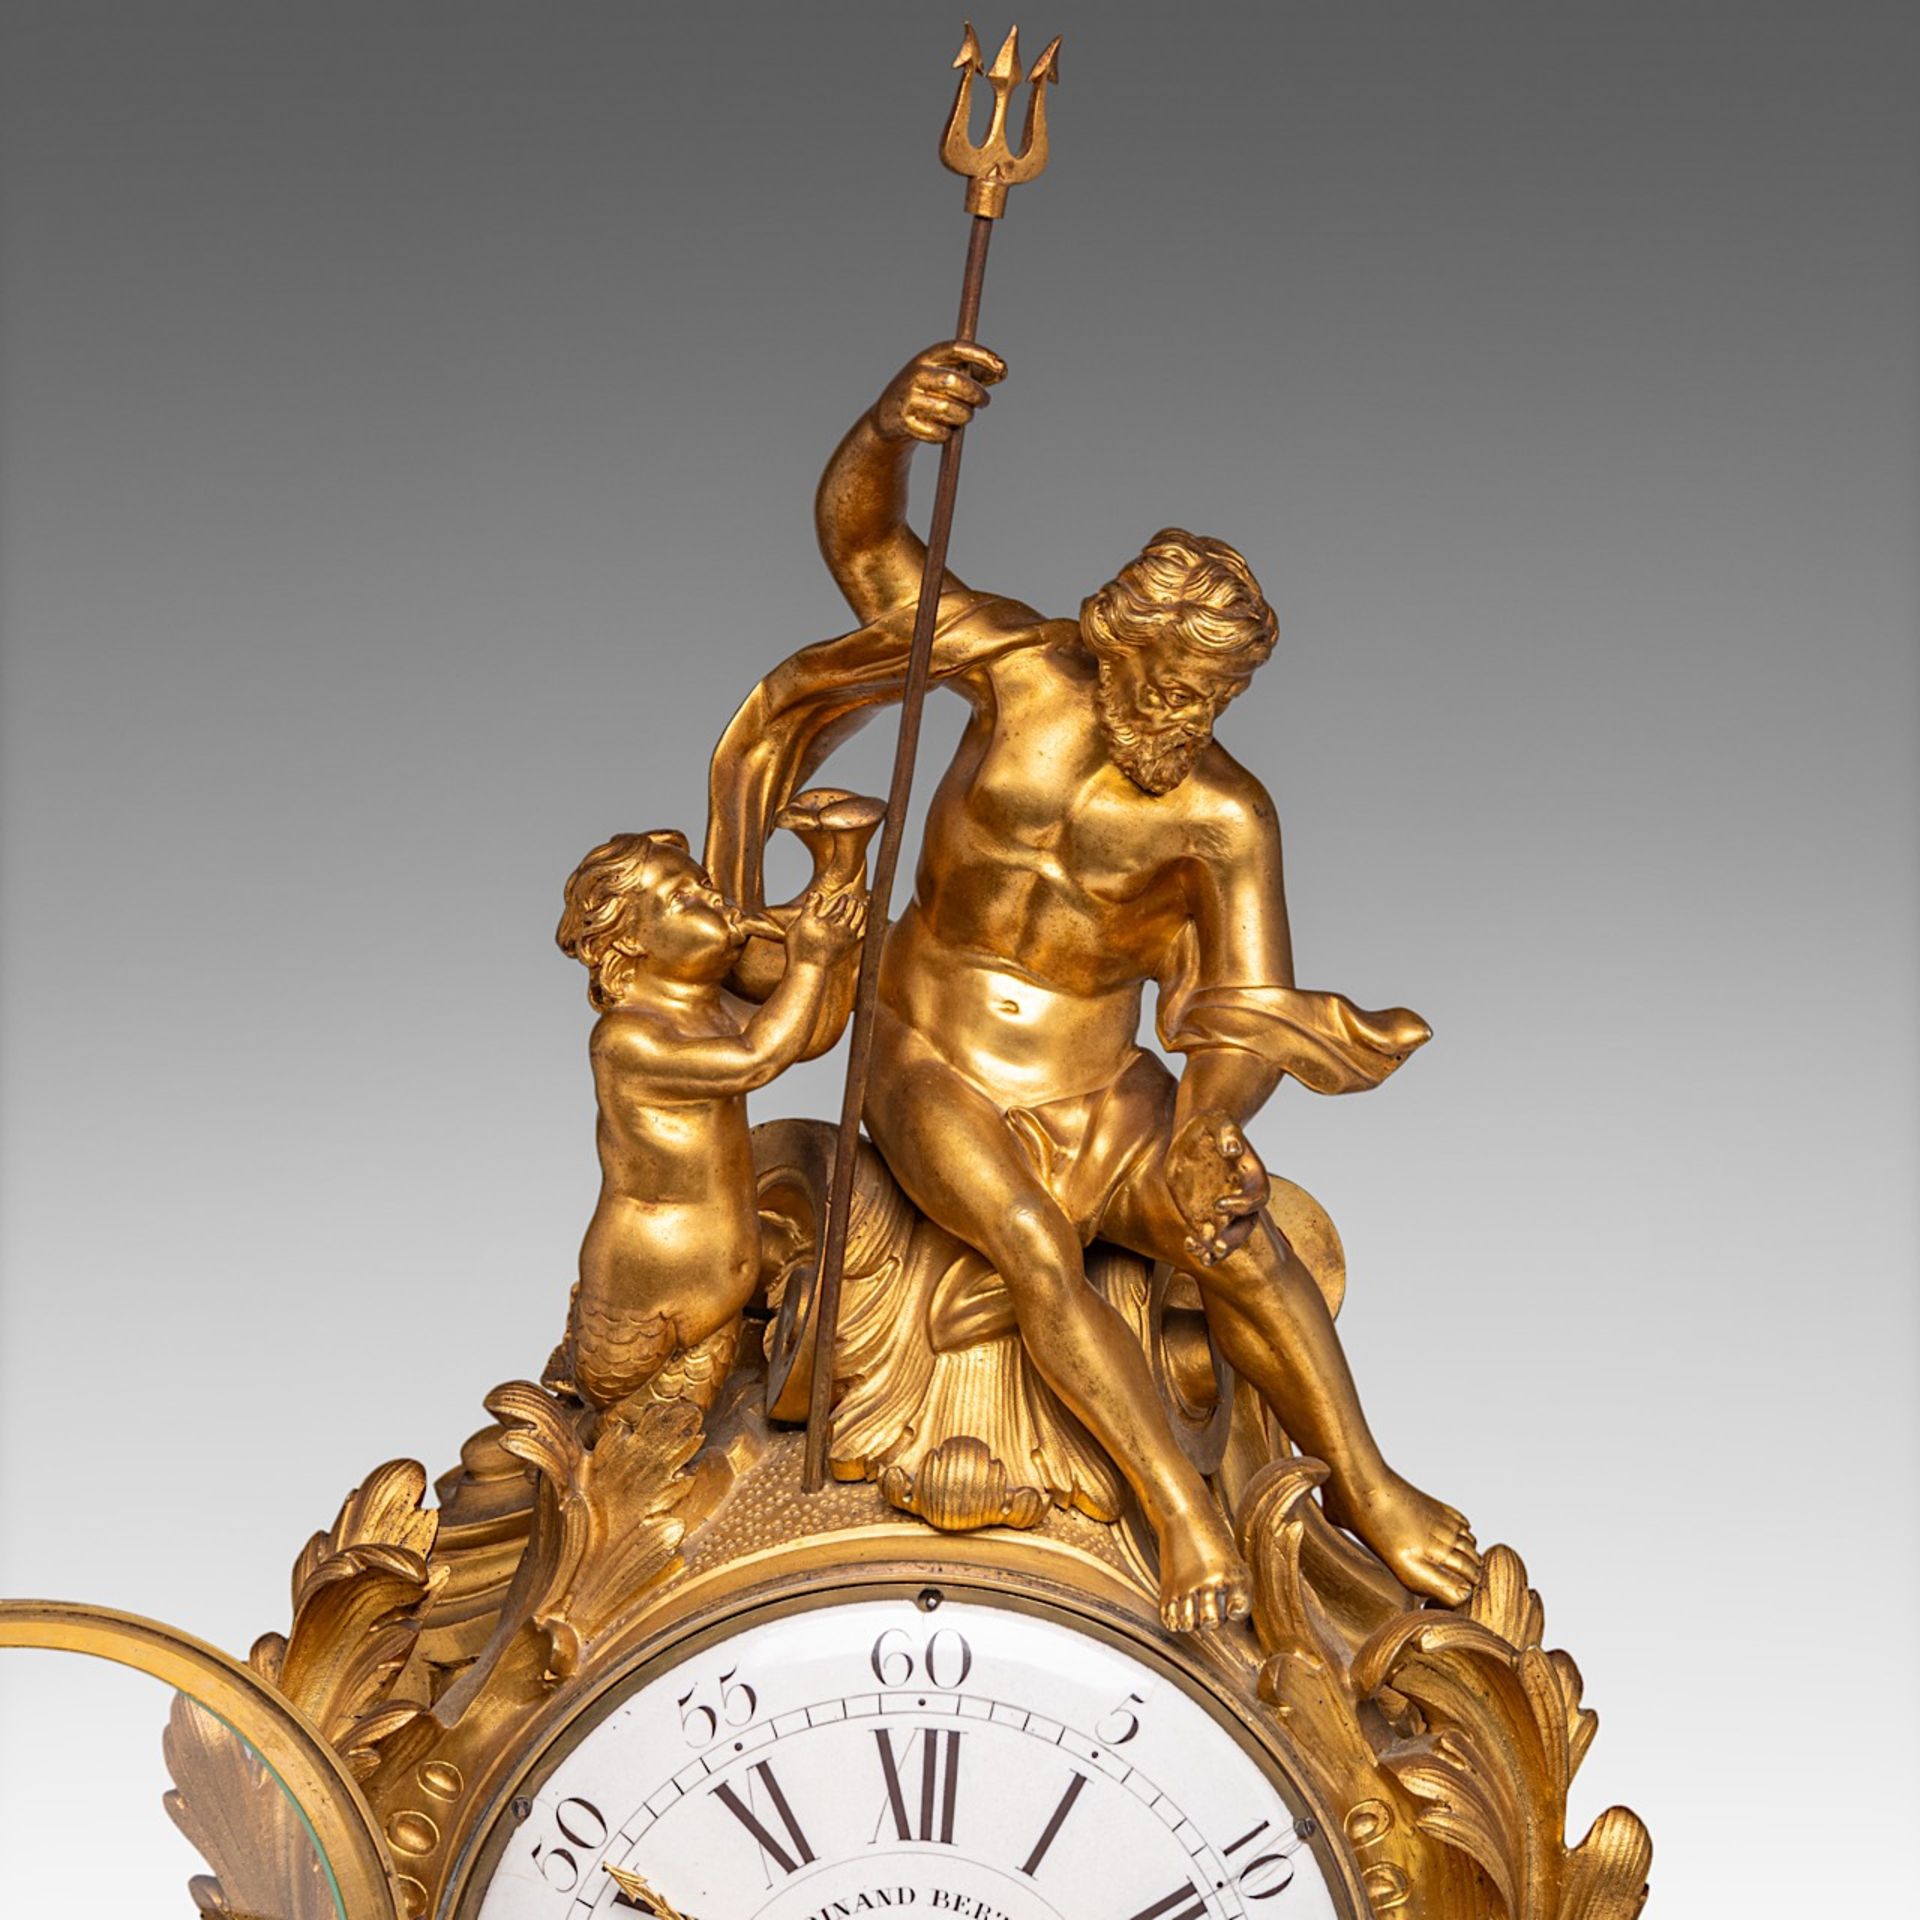 A Rococo Revival gilt bronze mantle clock, decorated with Neptune, Ferdinand Berthoud, H 71 cm - Image 3 of 9